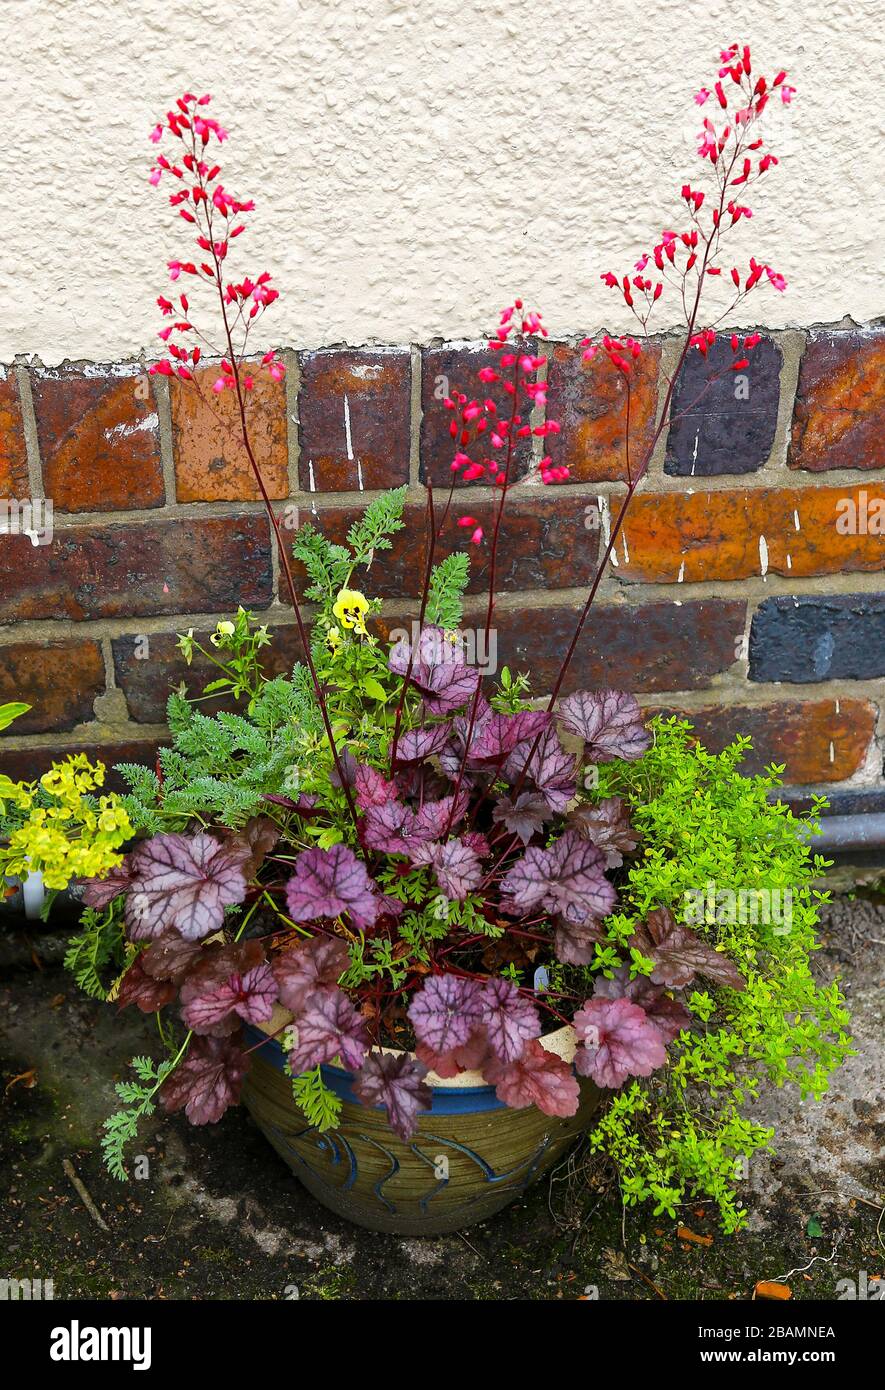 A Heuchera plant with a red flower spike Stock Photo